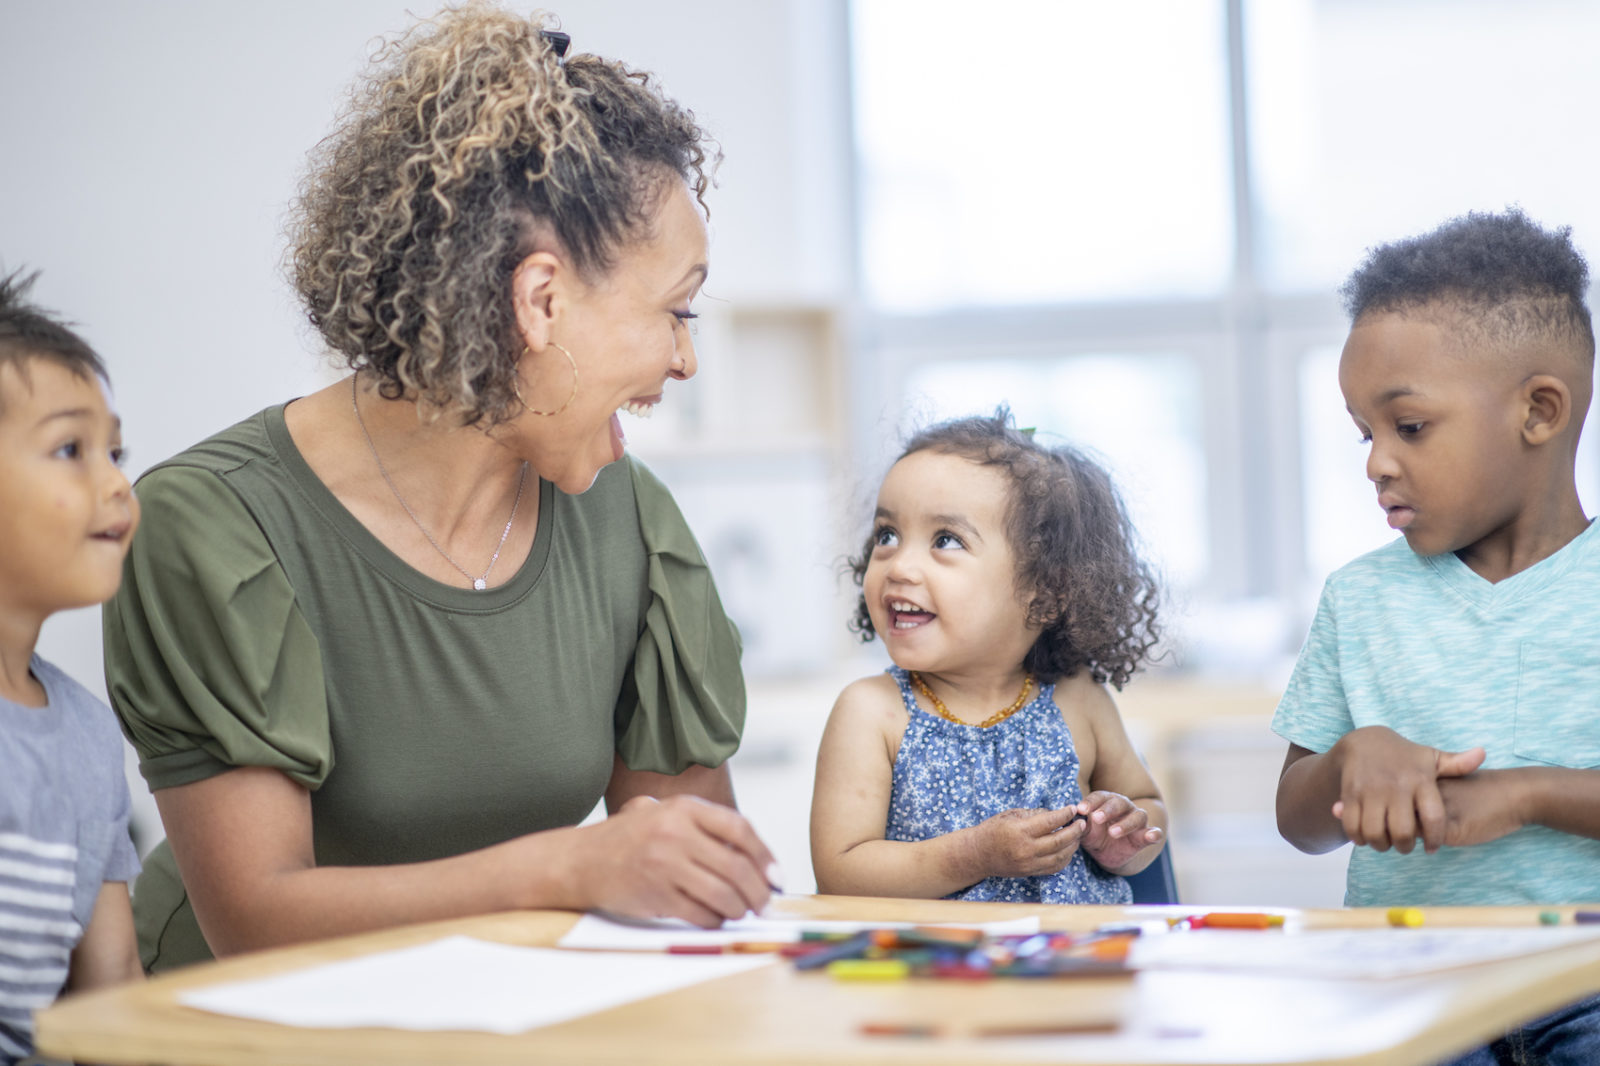 A preschool teacher laughs with her students while sitting at a desk. They are coloring and fully engaged.